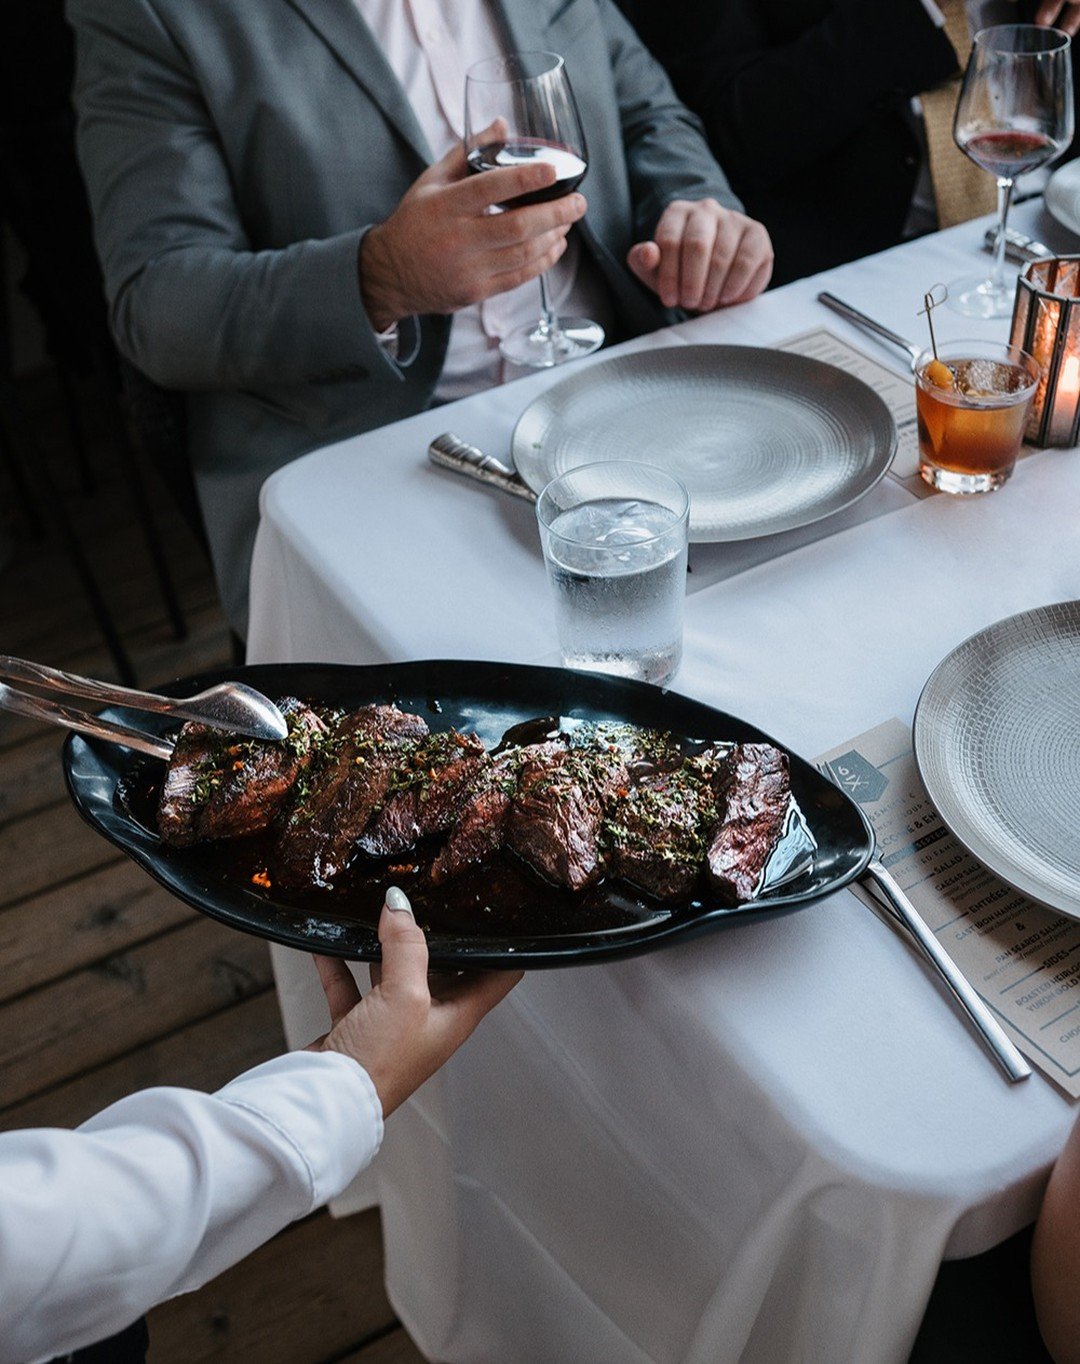 Did you know we have our famous Chimichurri Hanger Steak on the private dining menu? 👀
Follow the link in our bio for more information!

Image Credit: @ellengustafsonphoto